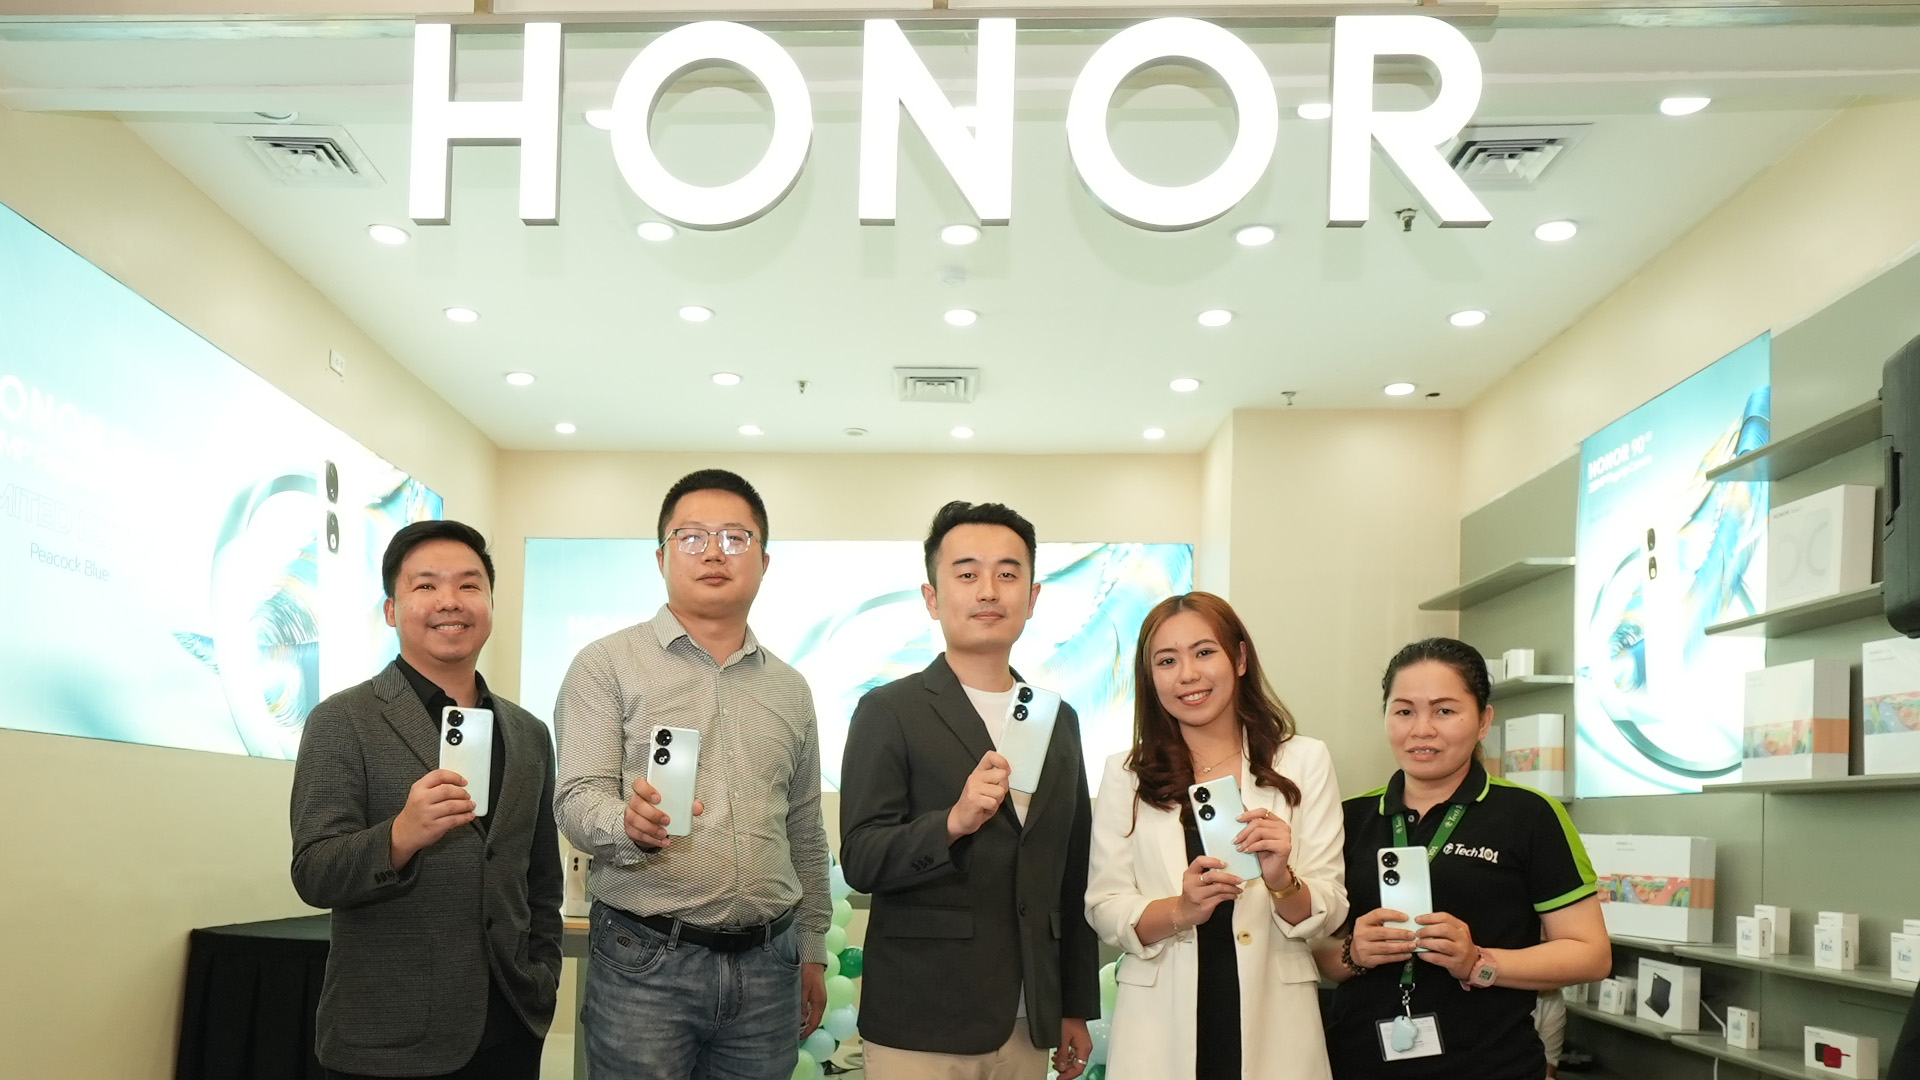 HONOR Philippines PR Manager Pao Oga, Retail Sales Director Tom Yuan, GTM Manager Steven Yan, and Brand Marketing Manager Joepy Libo-on with EC Panda Store OIC Evelyn Enong